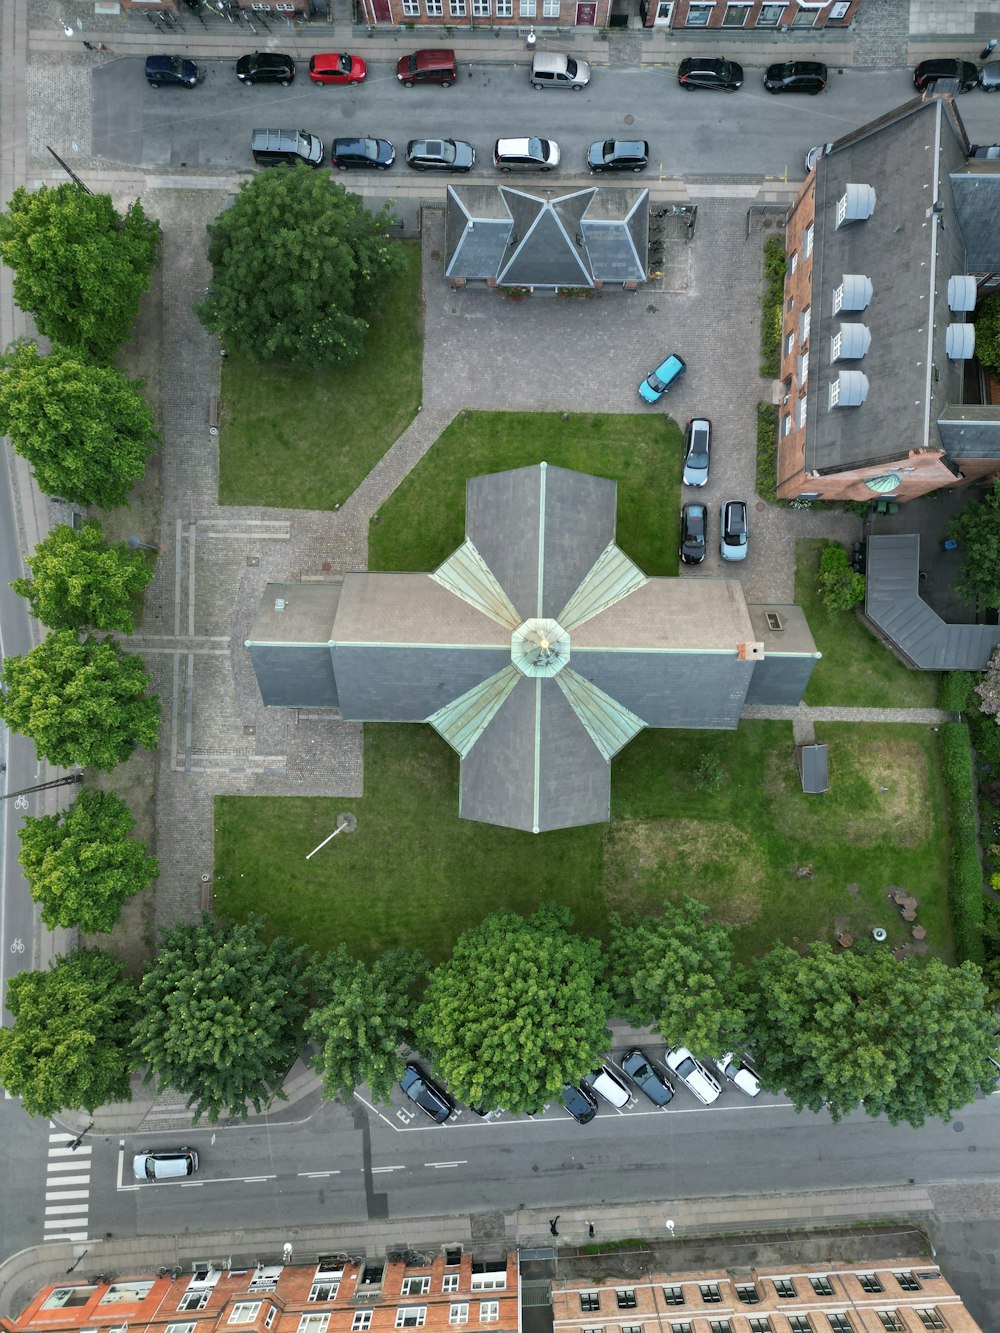 an aerial view of a park with cars parked in it